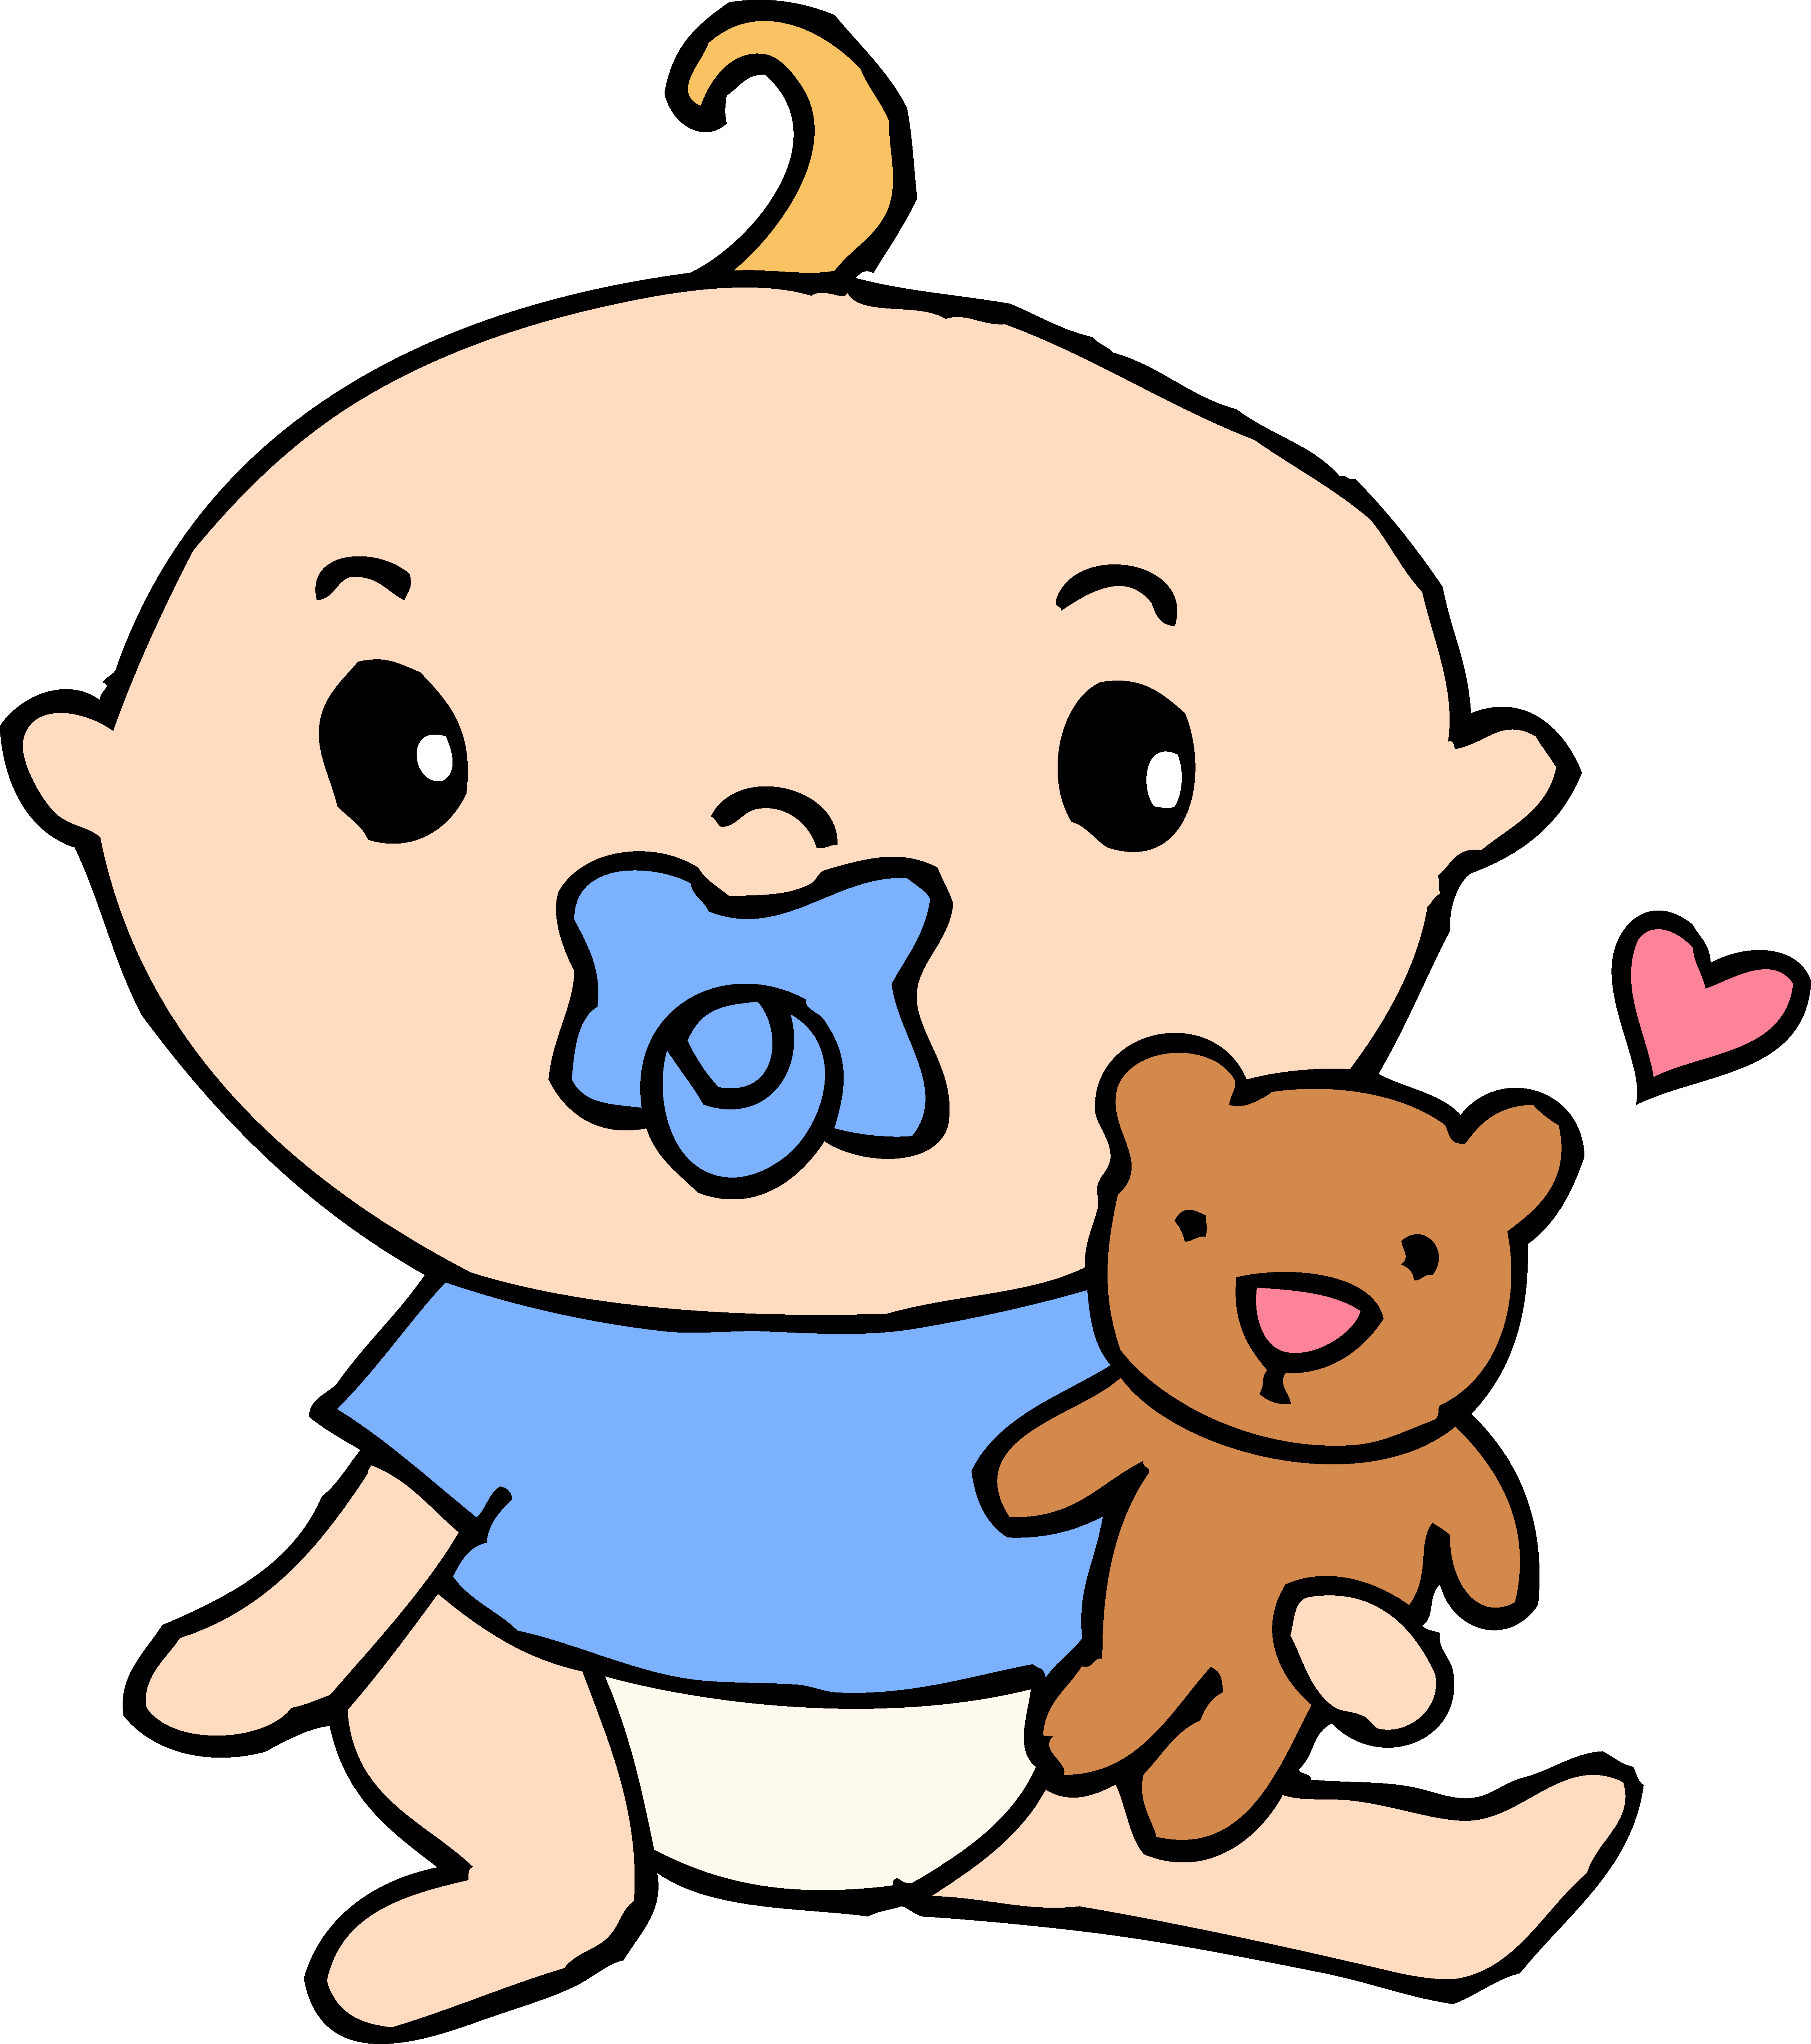 clipart of a newborn baby - photo #20